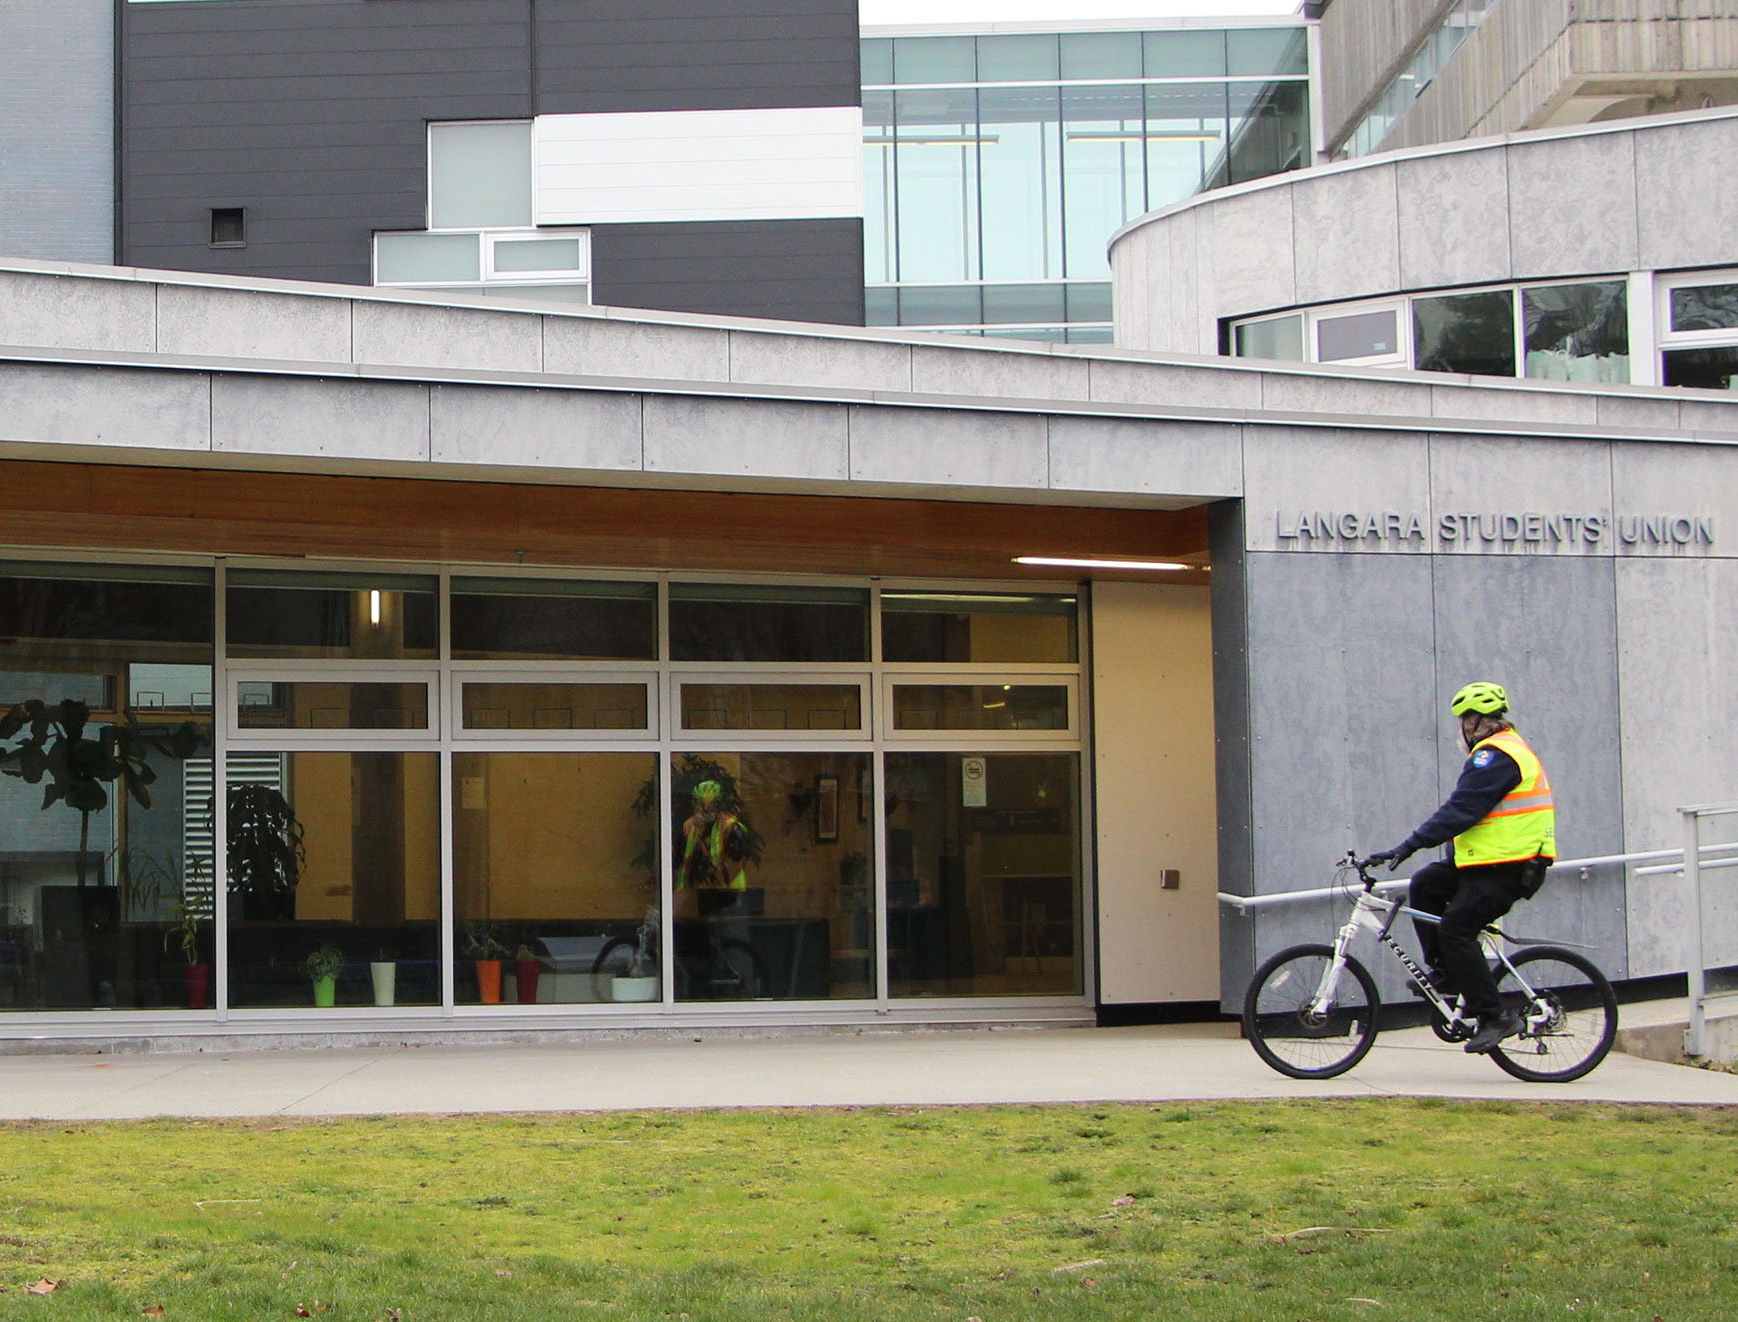 Campus security checking on the Langara Student Union building at Langara College.